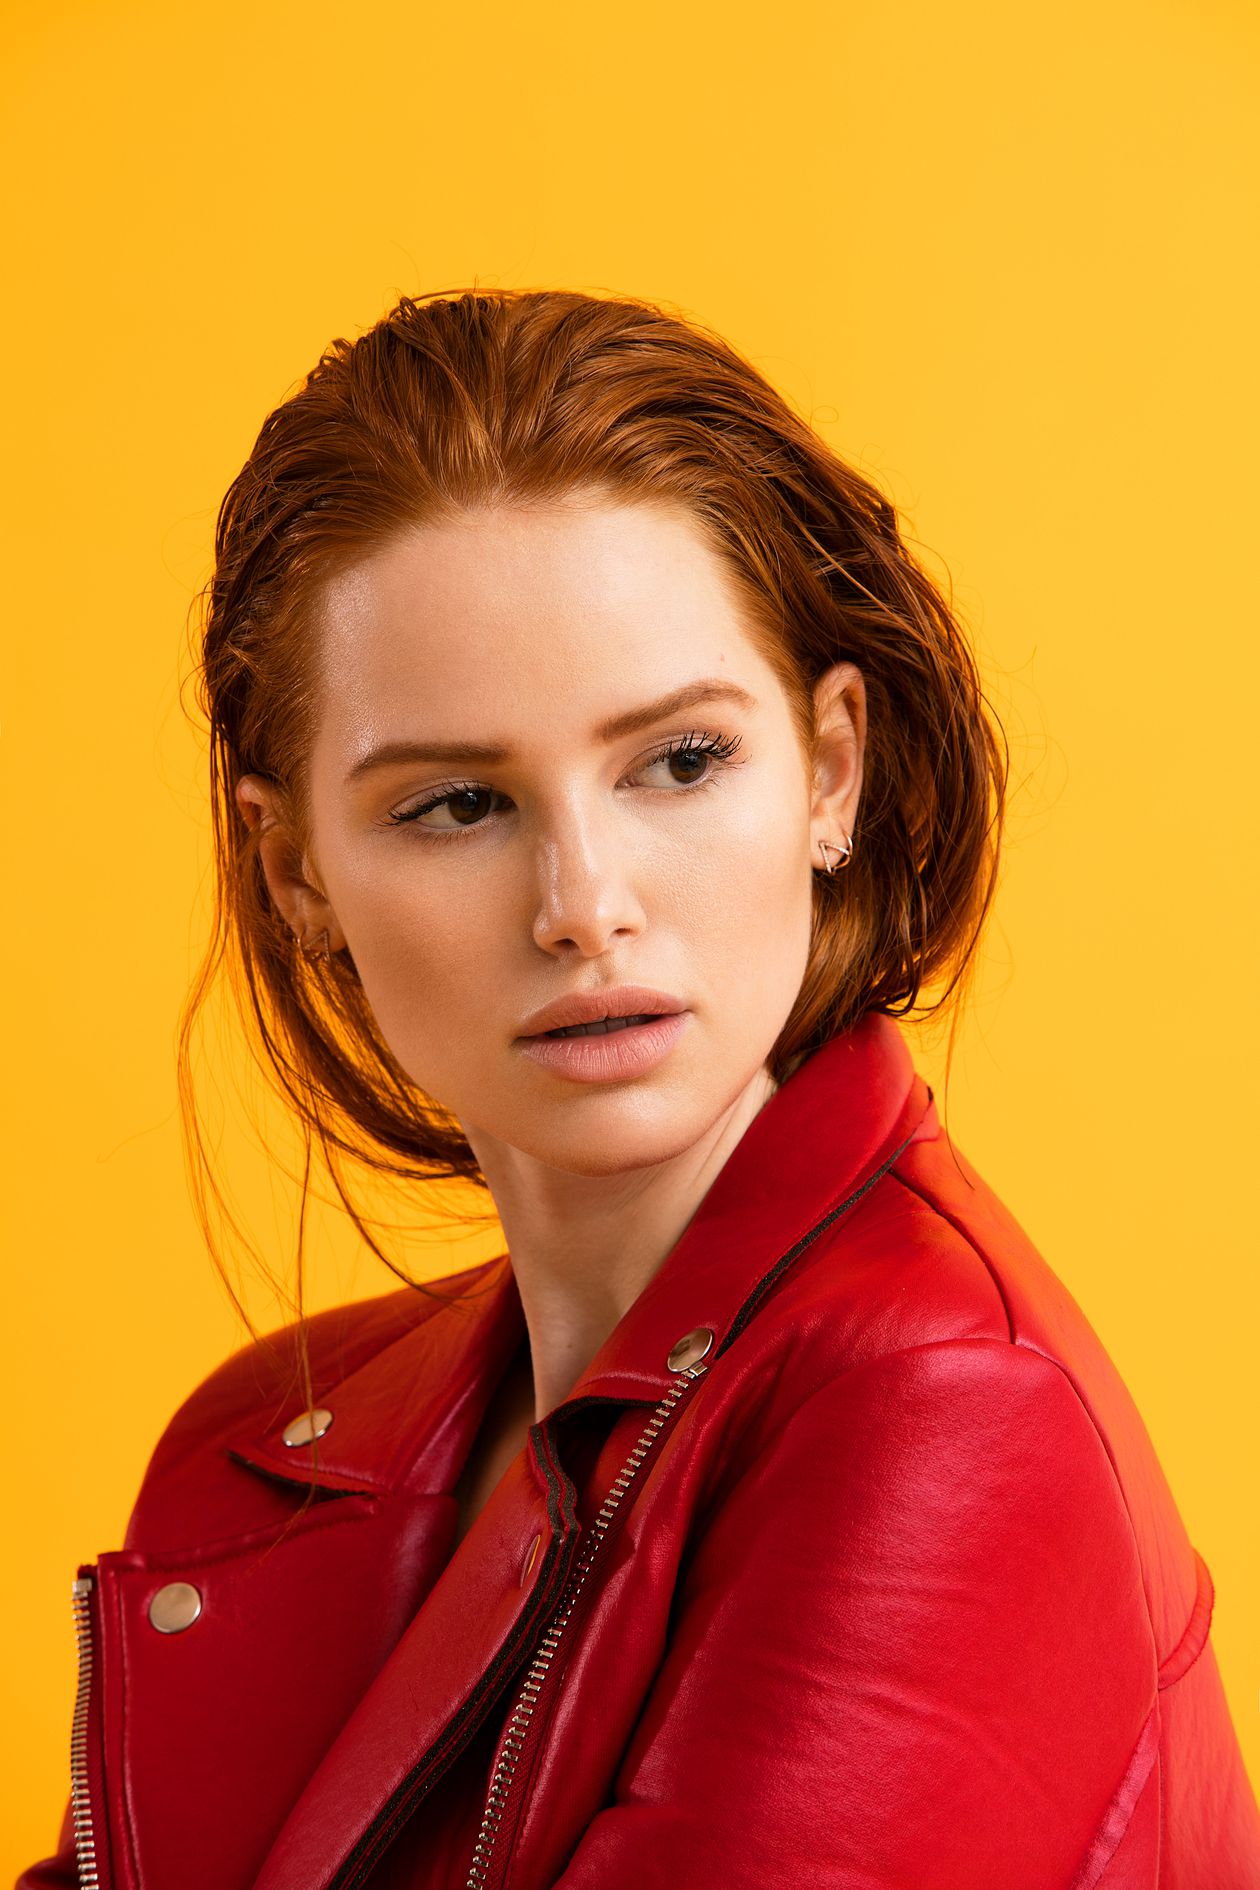 People 1260x1890 women model redhead long hair Madelaine Petsch actress portrait display yellow background simple background looking away makeup